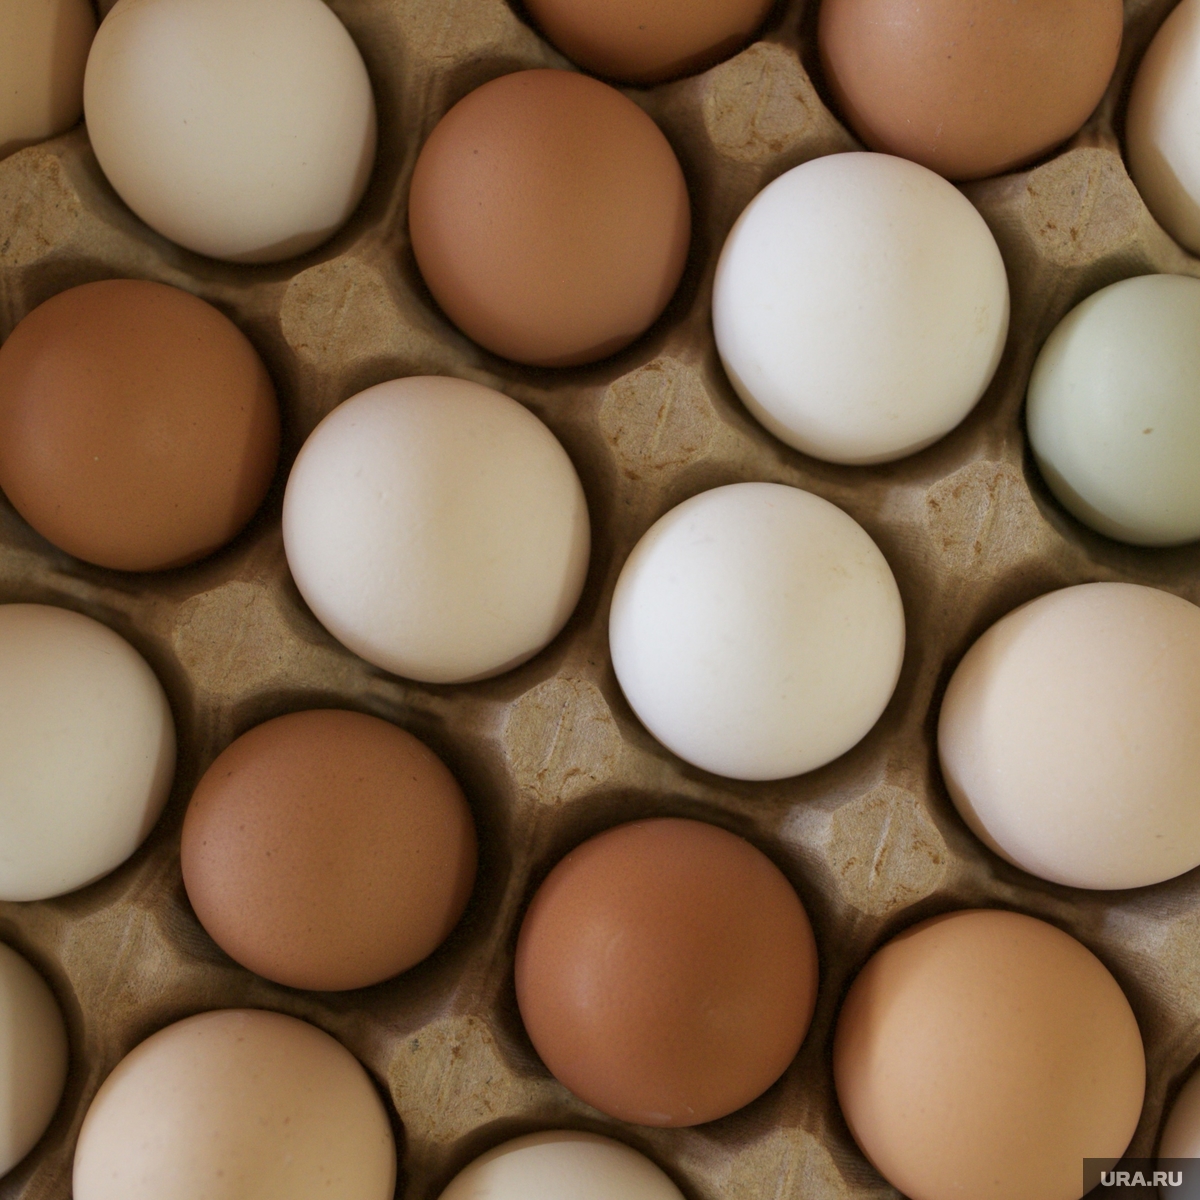 Large retail chains will reduce the trade mark-up on first-category eggs